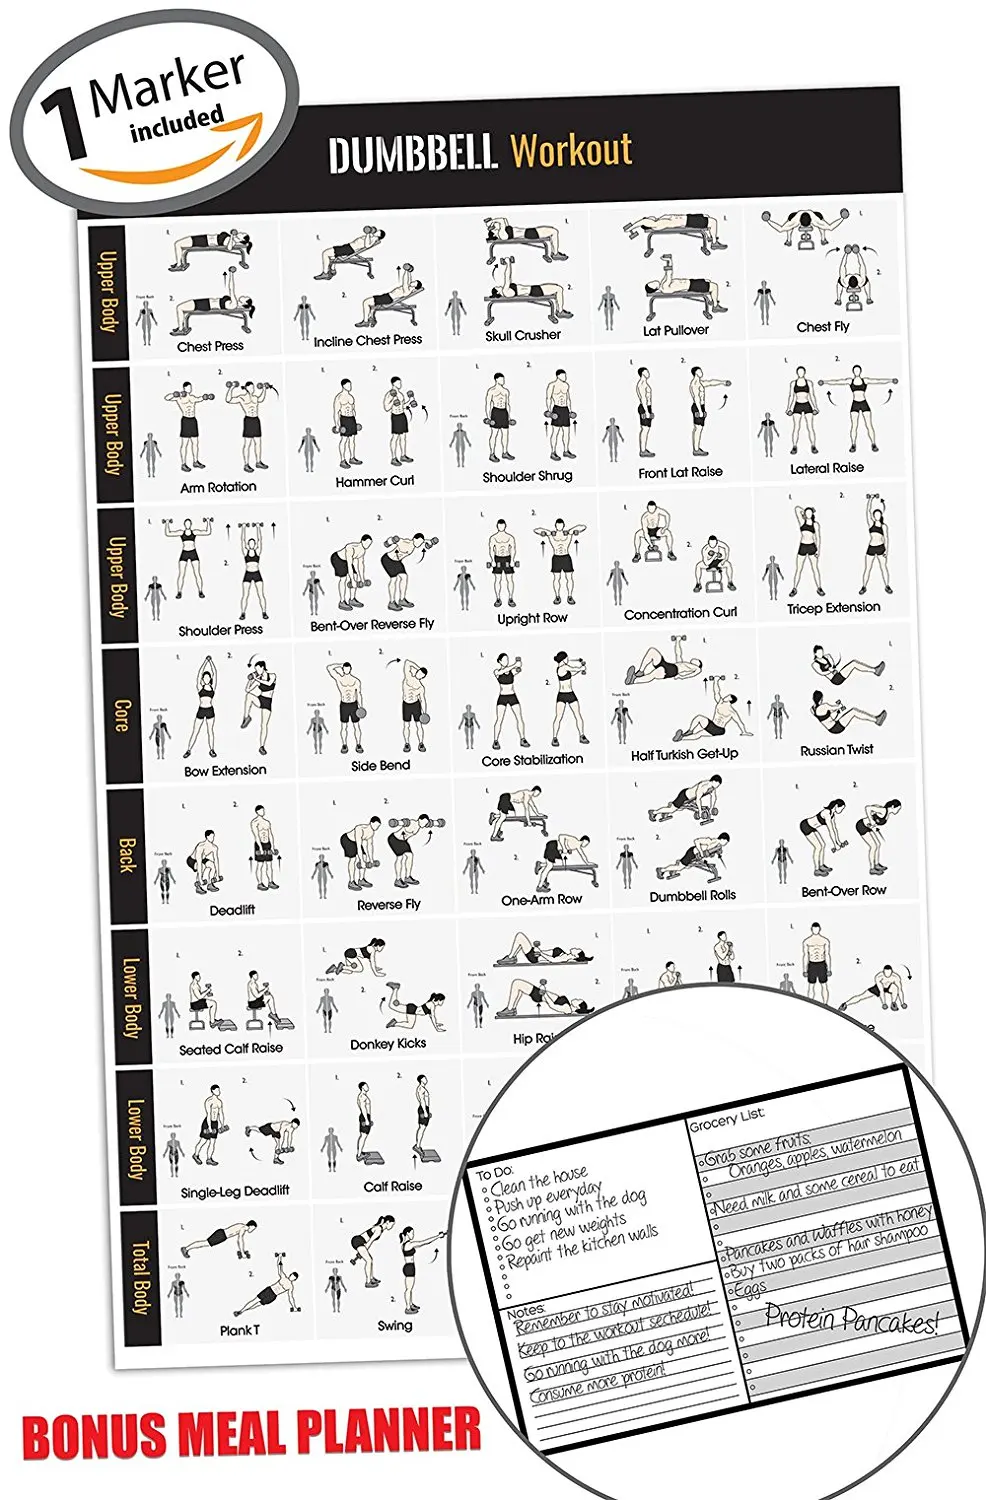 Dumbbell Workout Exercise Poster - Home Gym Fitness Workouts - New Year  Goals Build Core Muscle Lose Fat - Fitness Strength Training Poster -  Workout ...